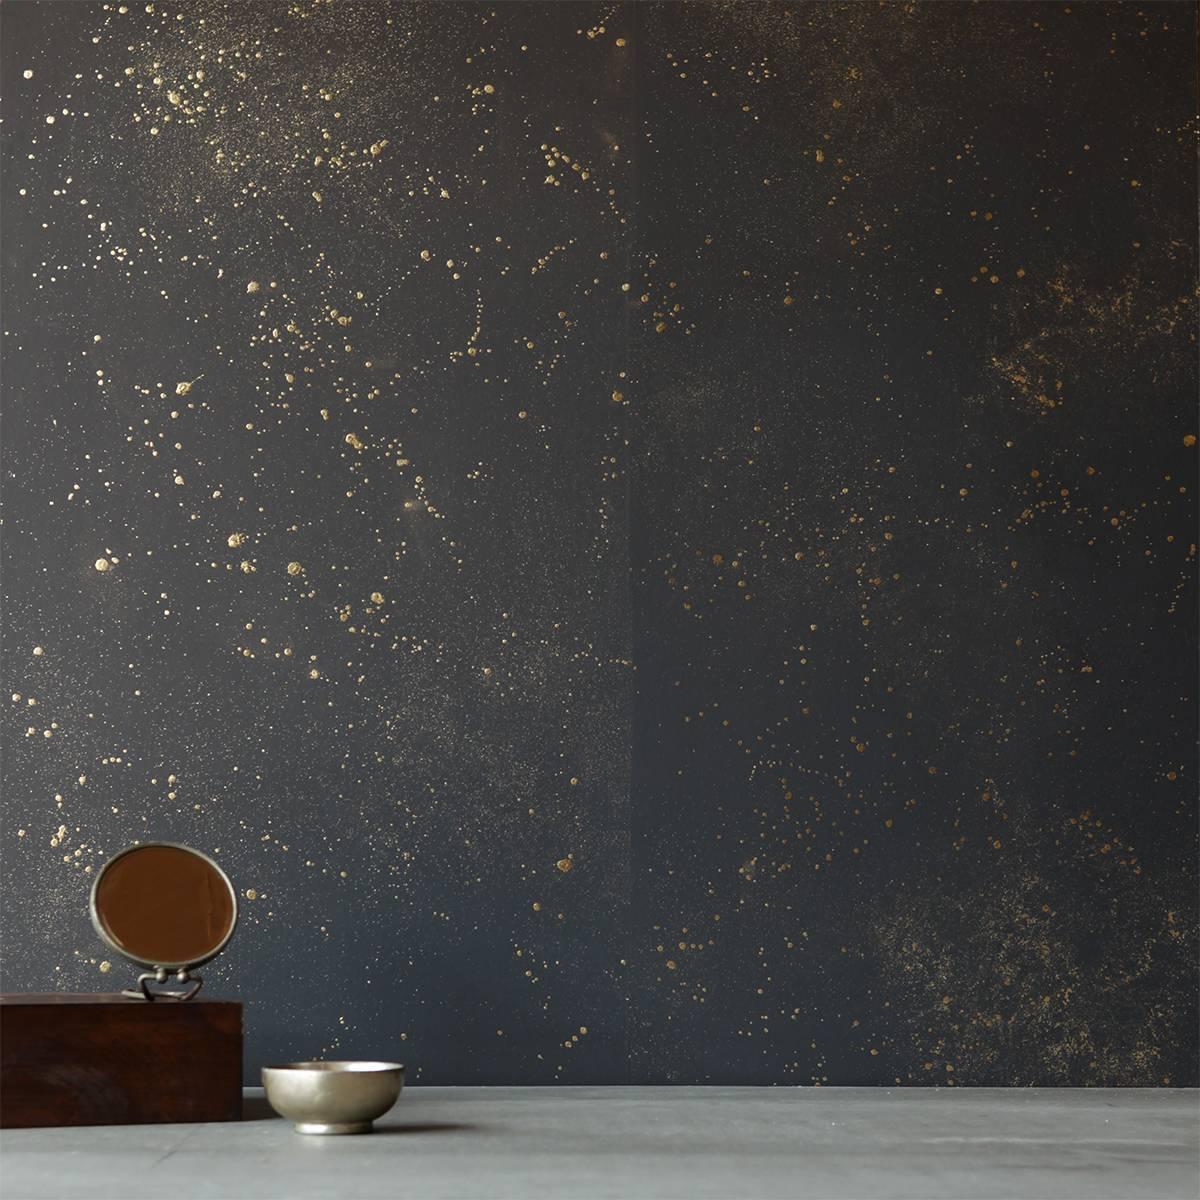 This listing is for a Panel Order of COSMOS in ELIKONAS. 
Before placing a panel order, a sample order is required.

Cosmos is an atmospheric, deep vibrant painted finish with original bursts of hand-gilt leaf - celestial stars in the sky.
Available